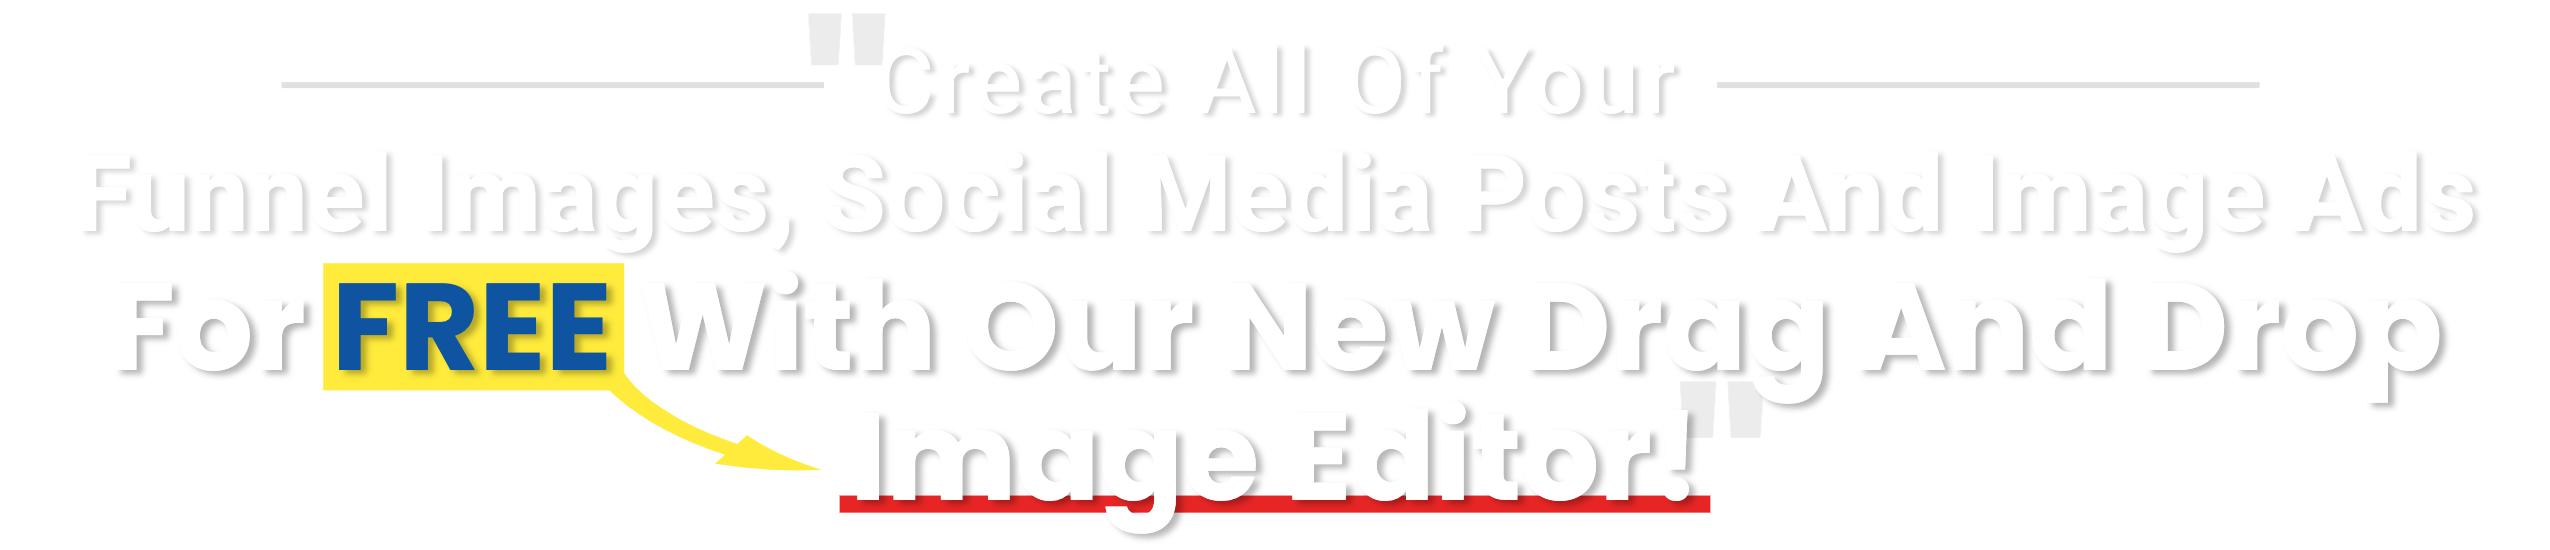 "Create All Of Your Funnel Images, Social Media Posts And Image Ads For  FREE With Our New Drag & Drop Image Editor!"